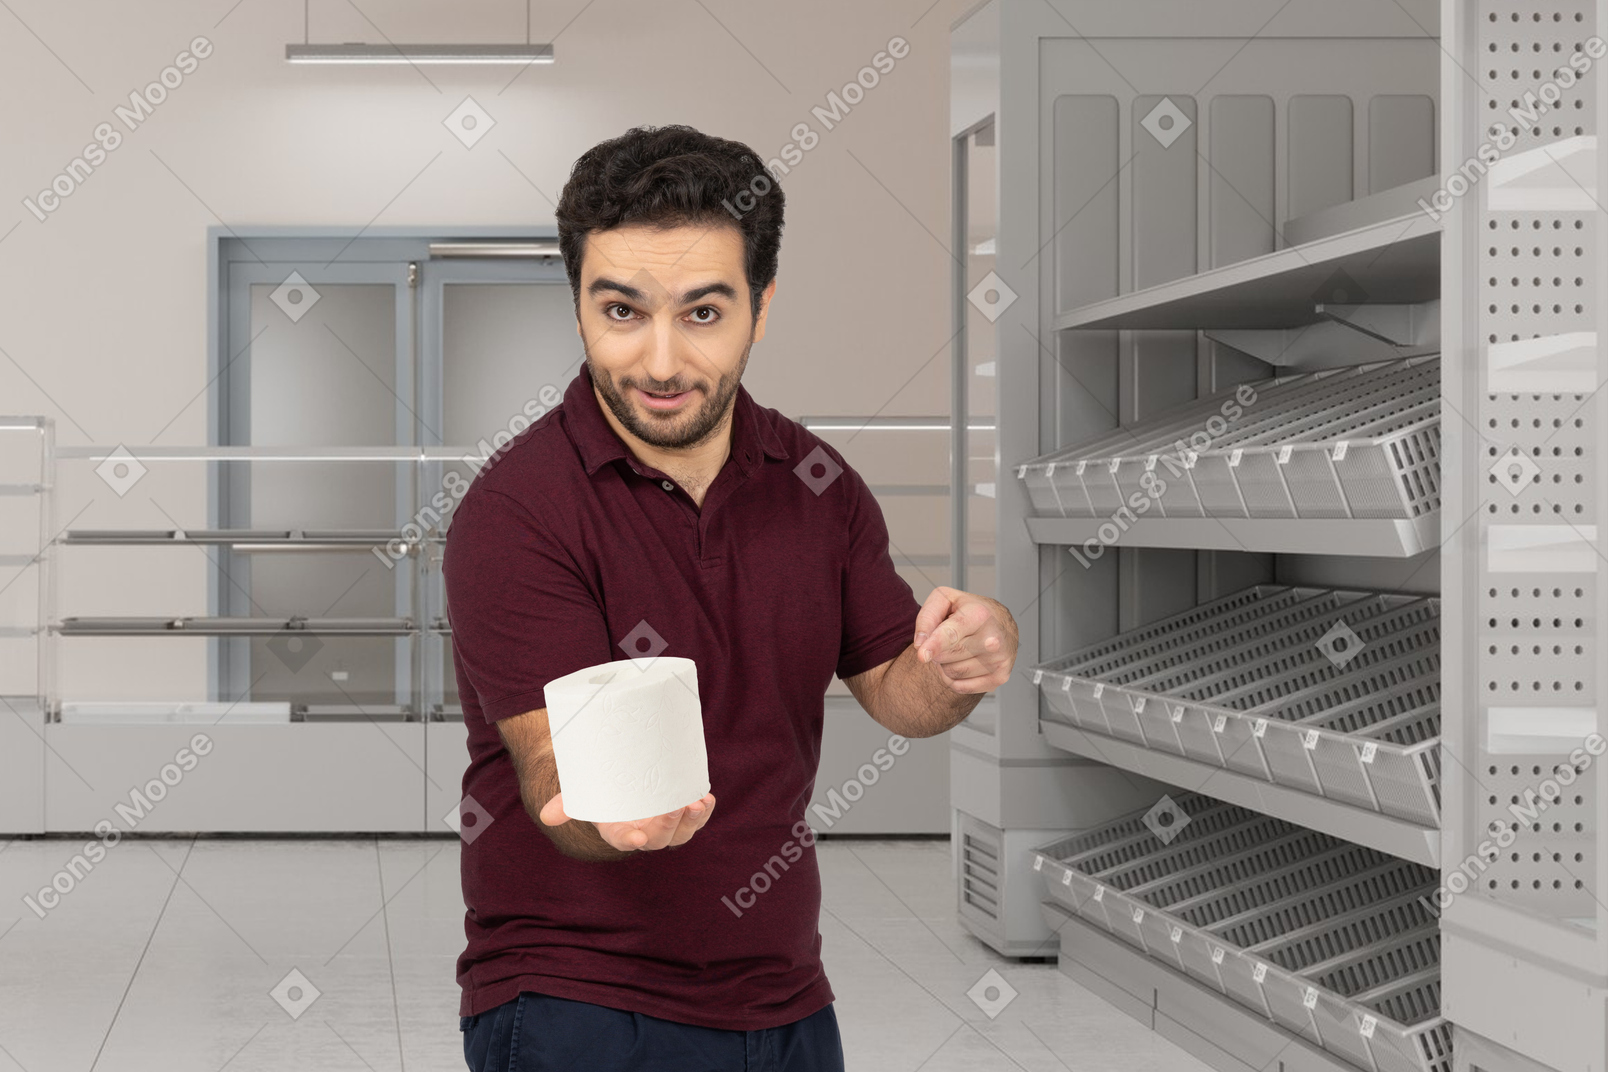 Man giving a toilet paper